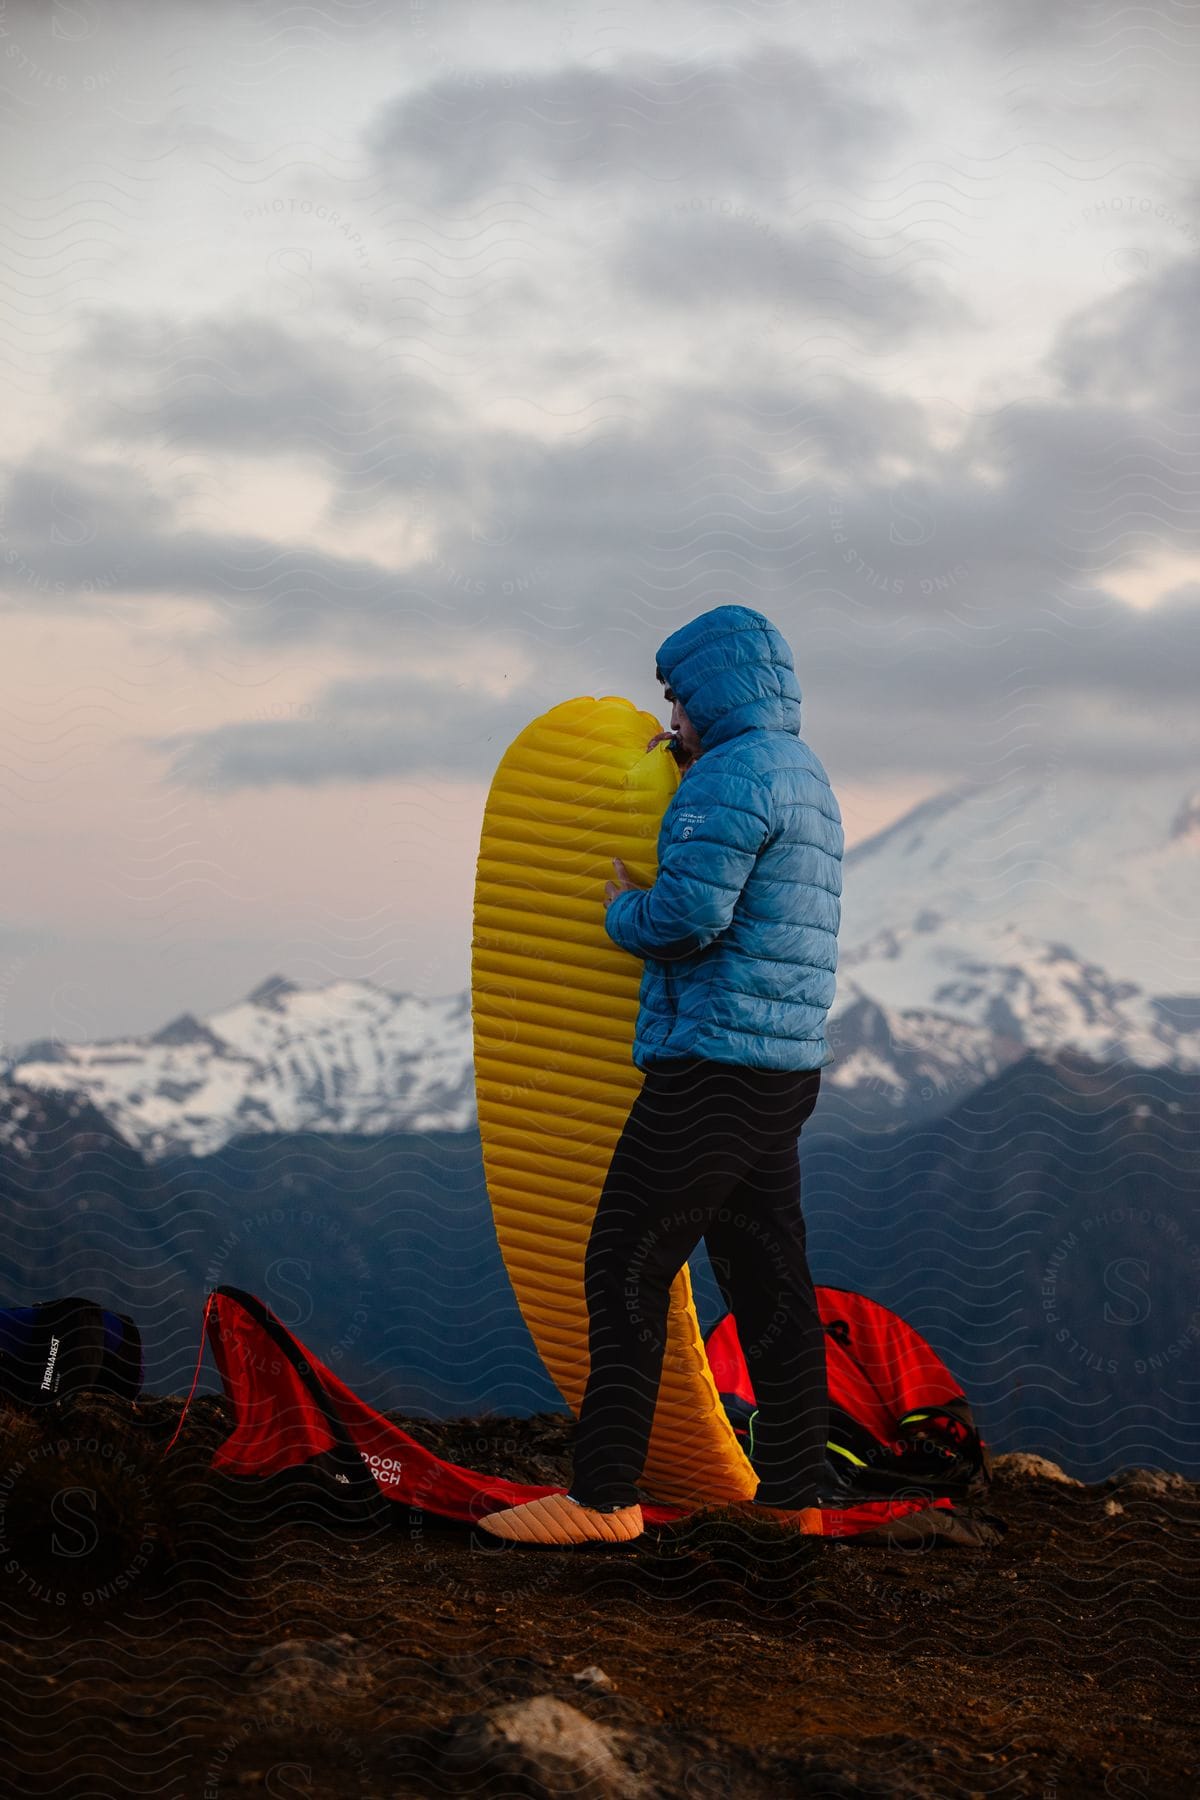 Individual in a blue jacket inflating a yellow sleeping pad on a mountain at dusk with snow-capped peaks in the distance and camping gear nearby.